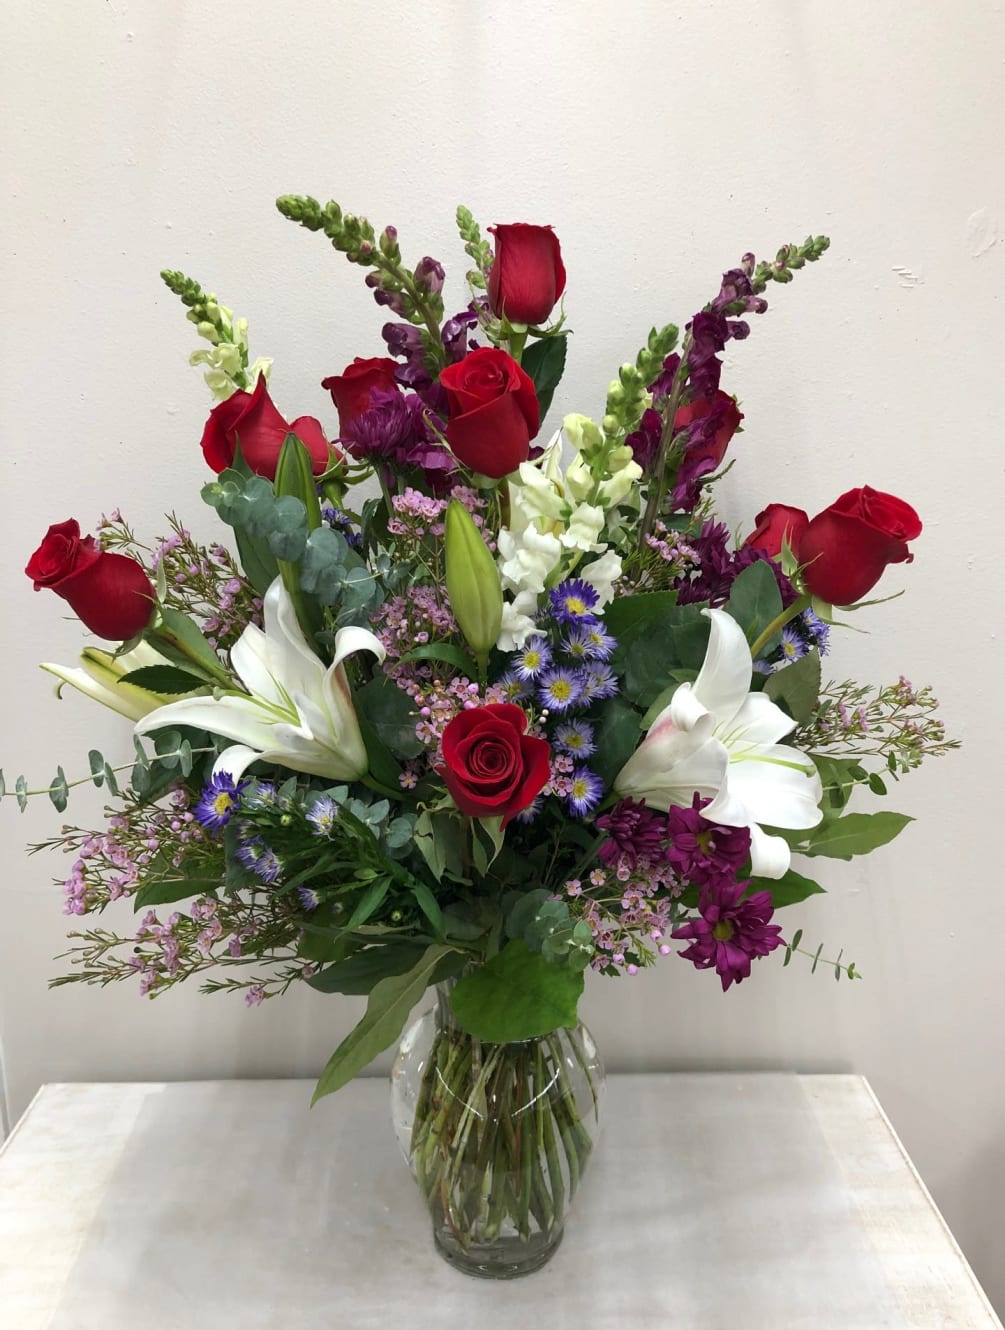 Roses, lilies, snapdragons with daises, wax flower, etc.

Flowers and color may vary